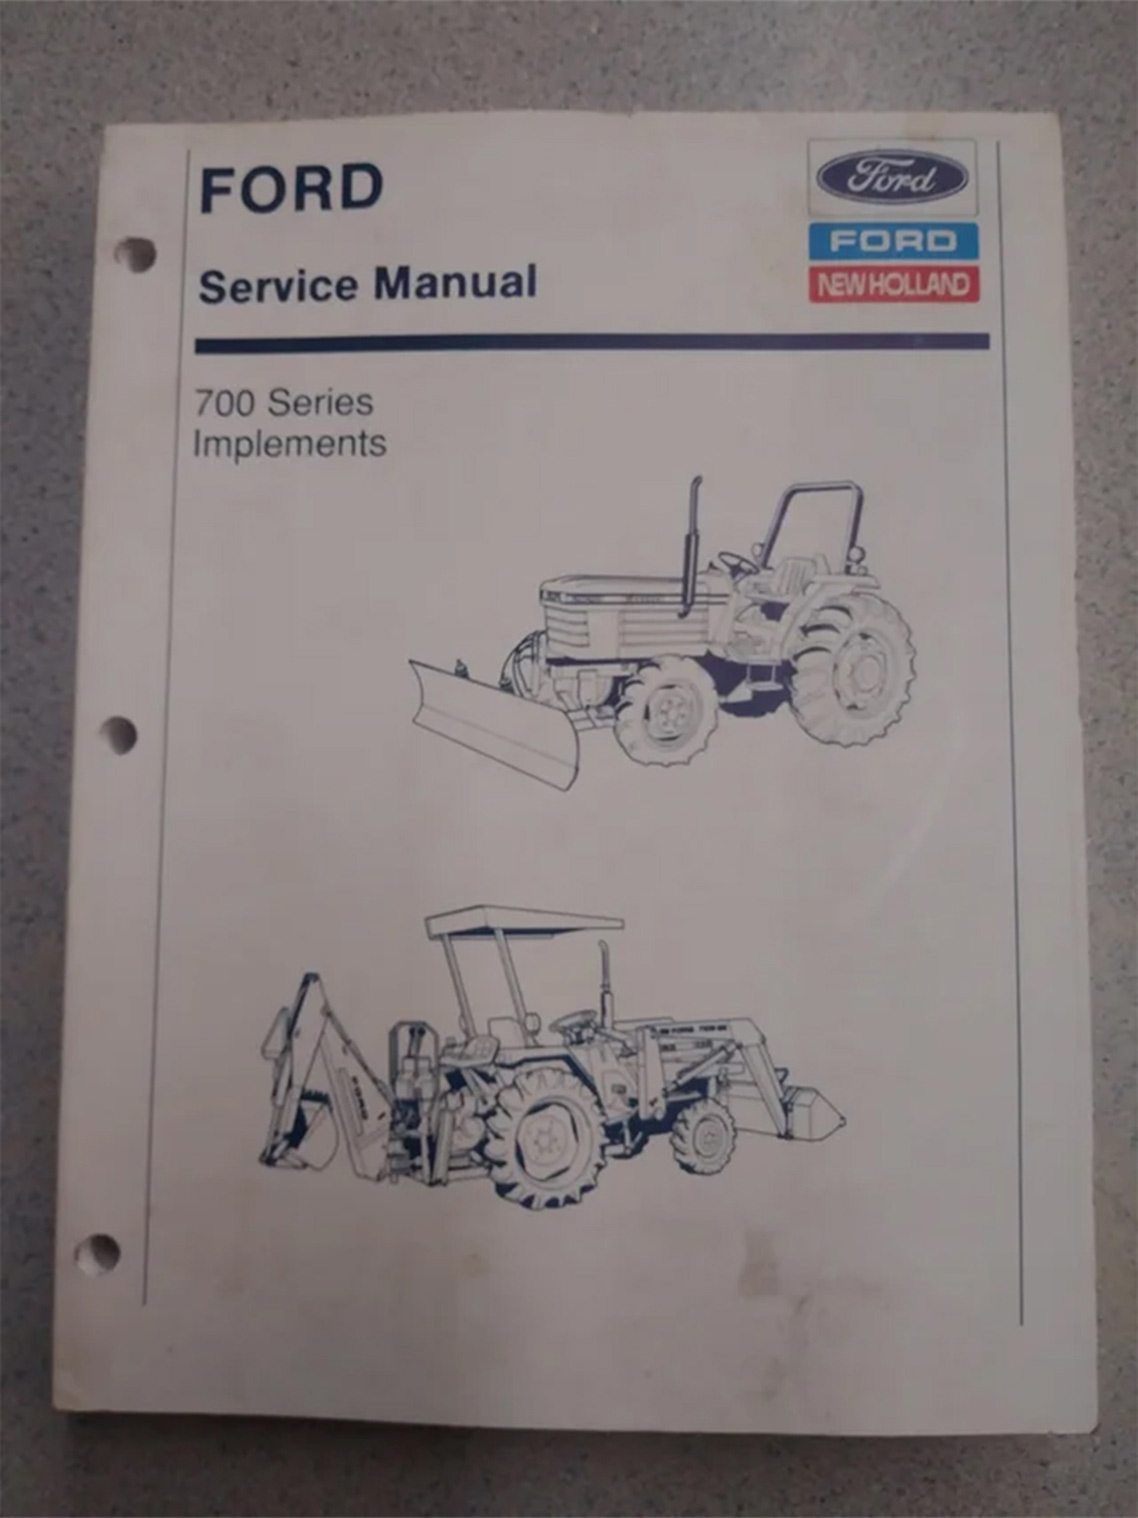 Ford 700 Series Implements Service Manual